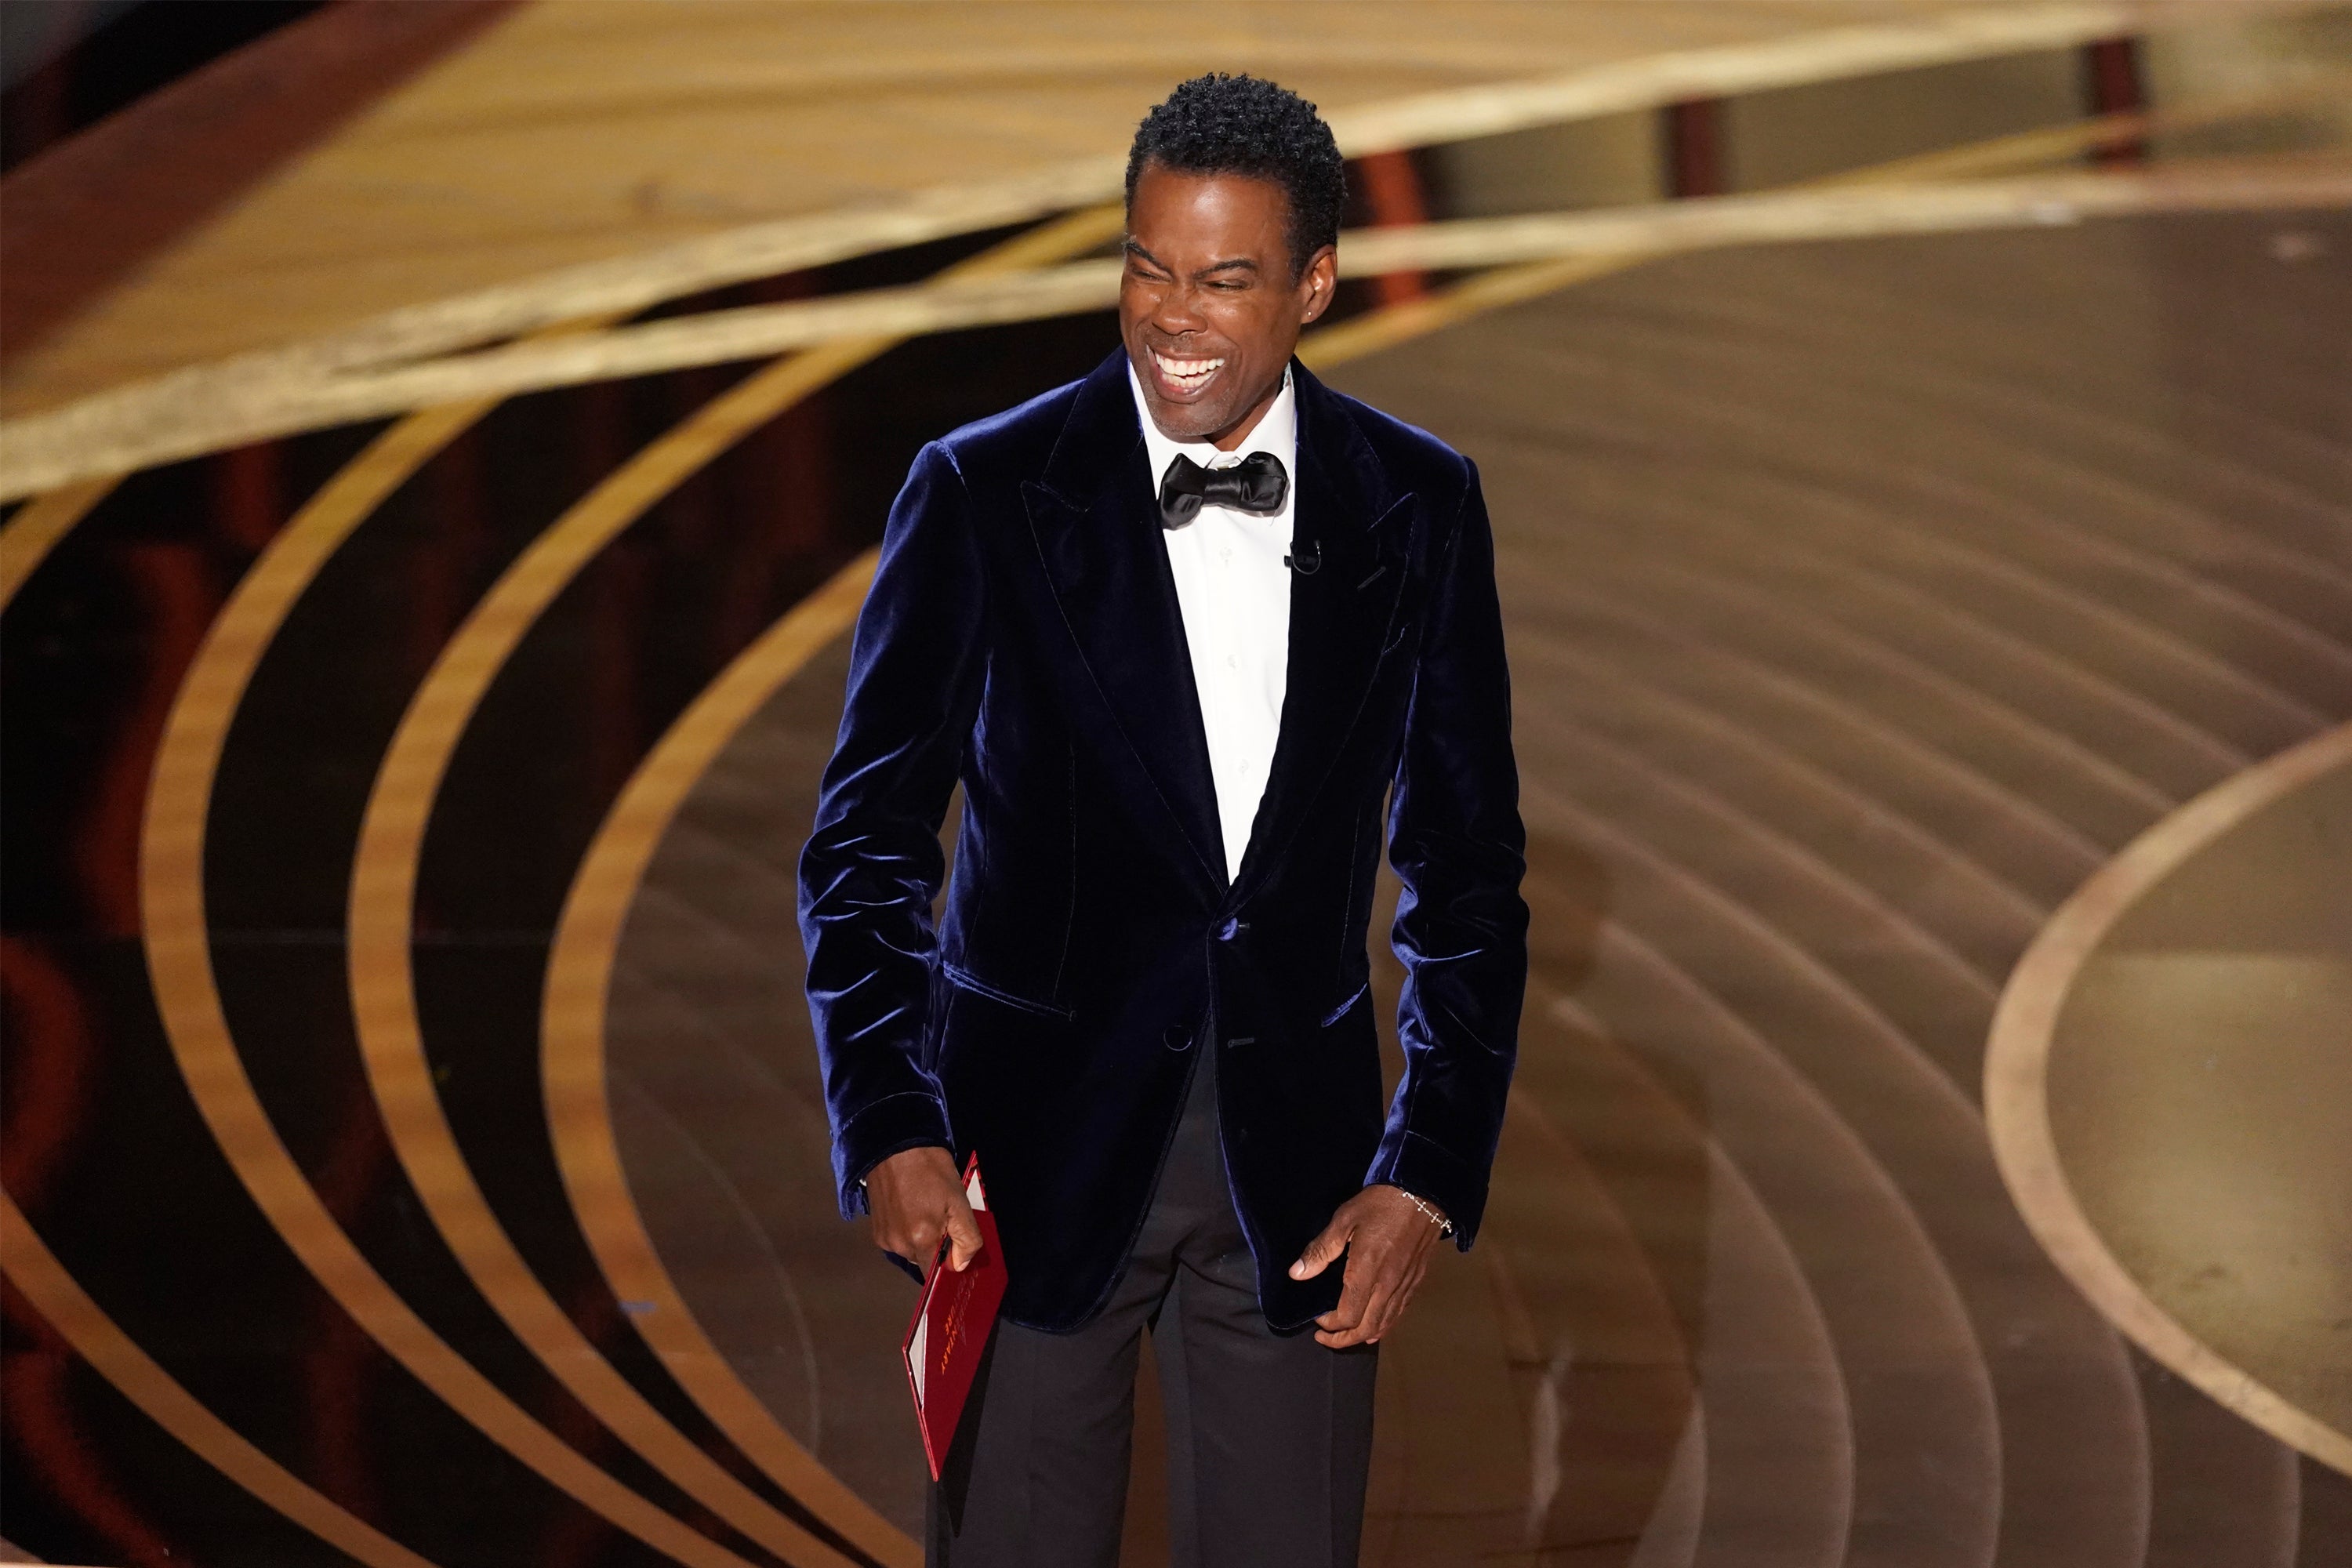 Chris Rock onstage during the Oscars live ceremony on 27 April at the Dolby Theatre in Los Angeles